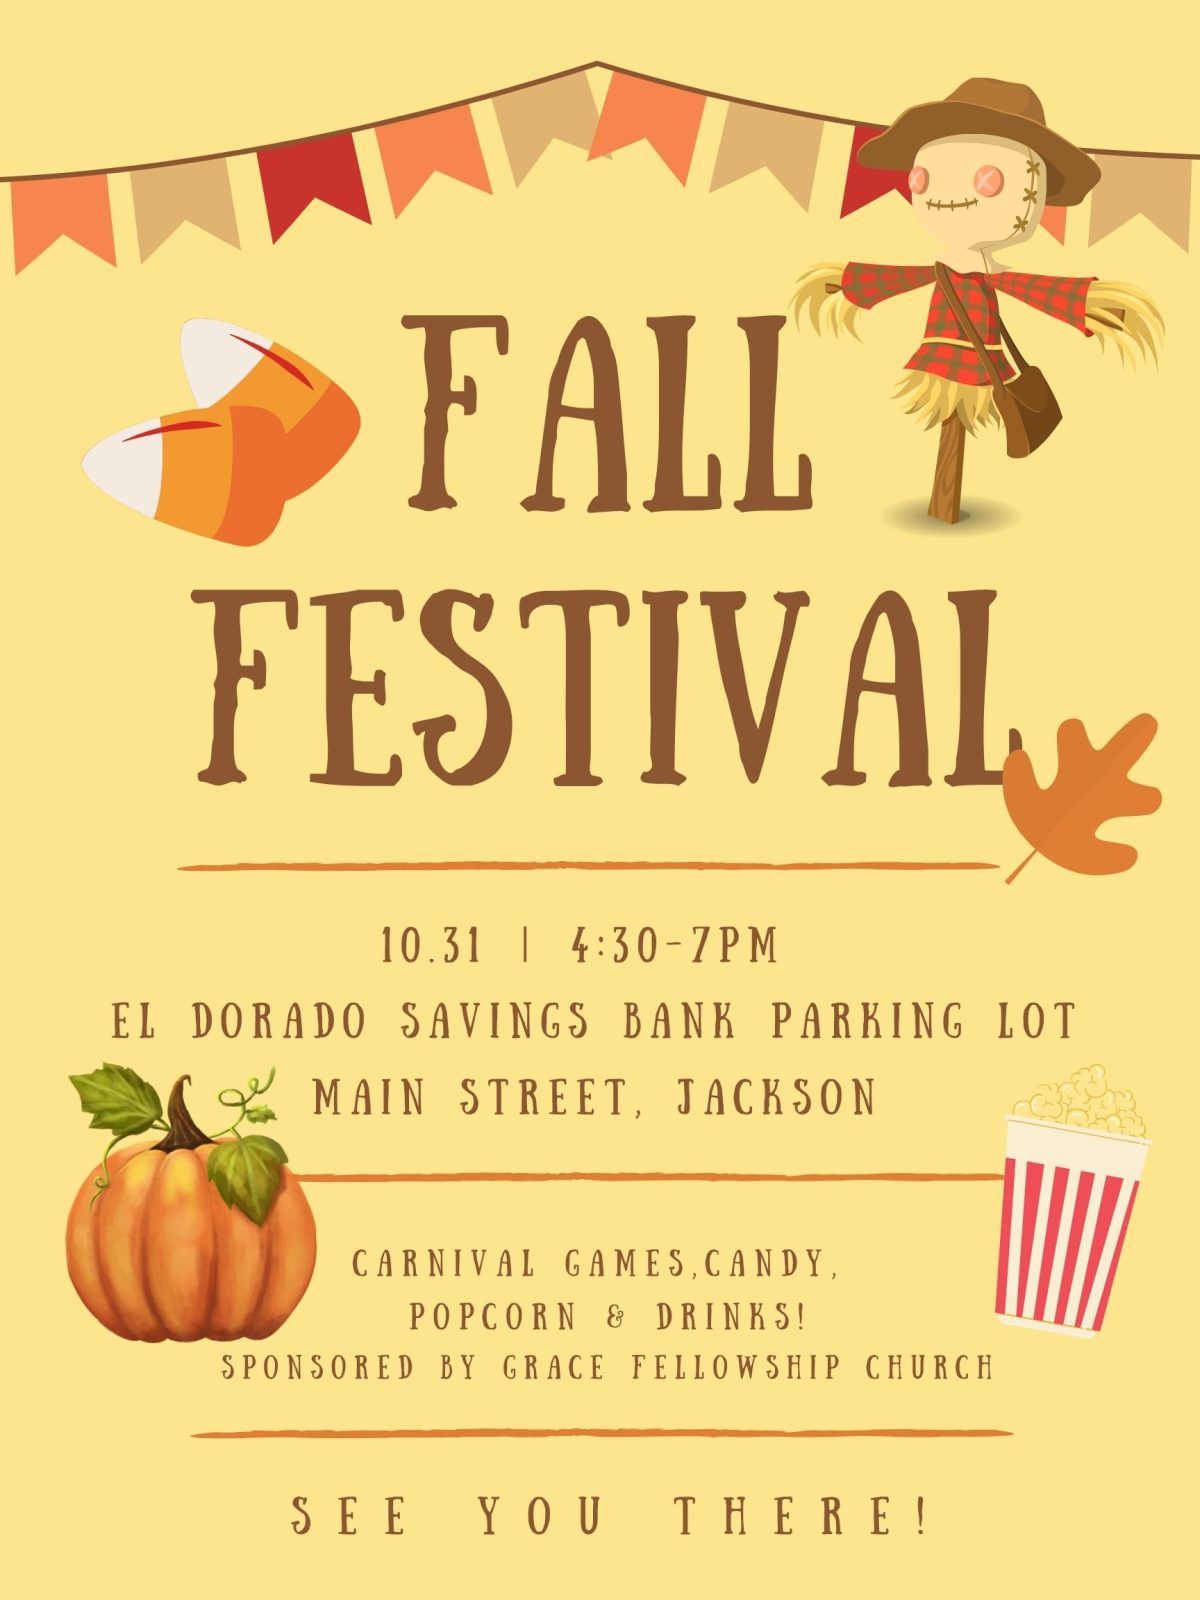 Fall Festival flyer yellow background